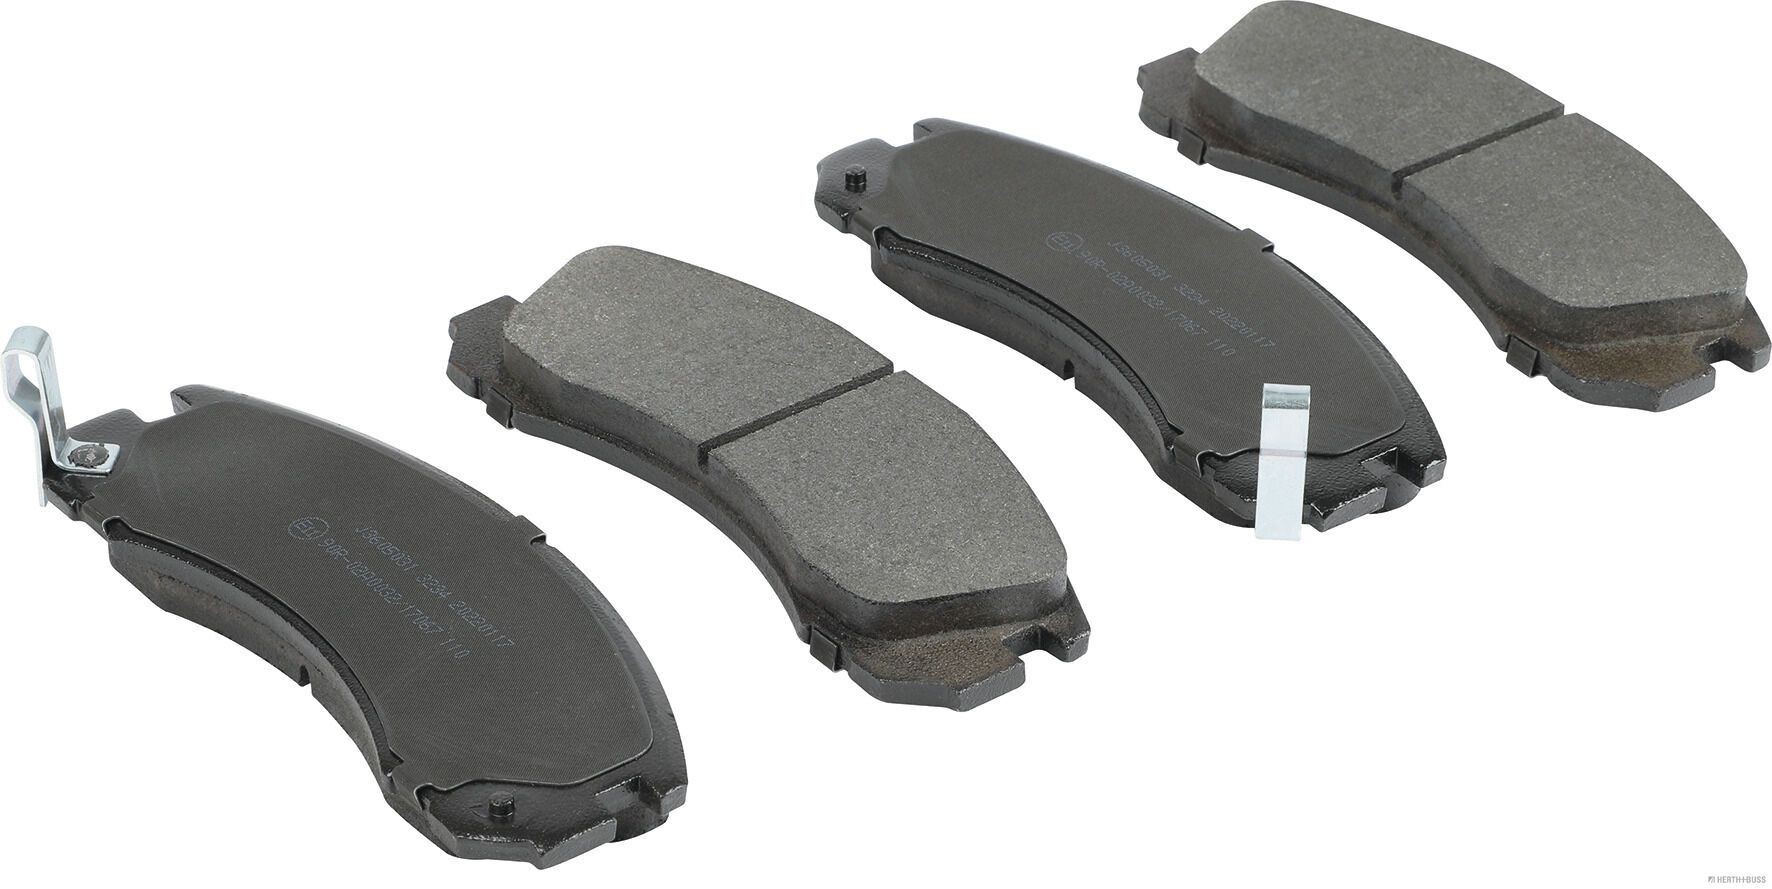 21769 HERTH+BUSS JAKOPARTS with acoustic wear warning Height 1: 58,4mm, Height 2: 58,4mm, Width 1: 149,8mm, Width 2 [mm]: 149,8mm, Thickness 1: 15,2mm, Thickness 2: 15,2mm Brake pads J3605031 buy